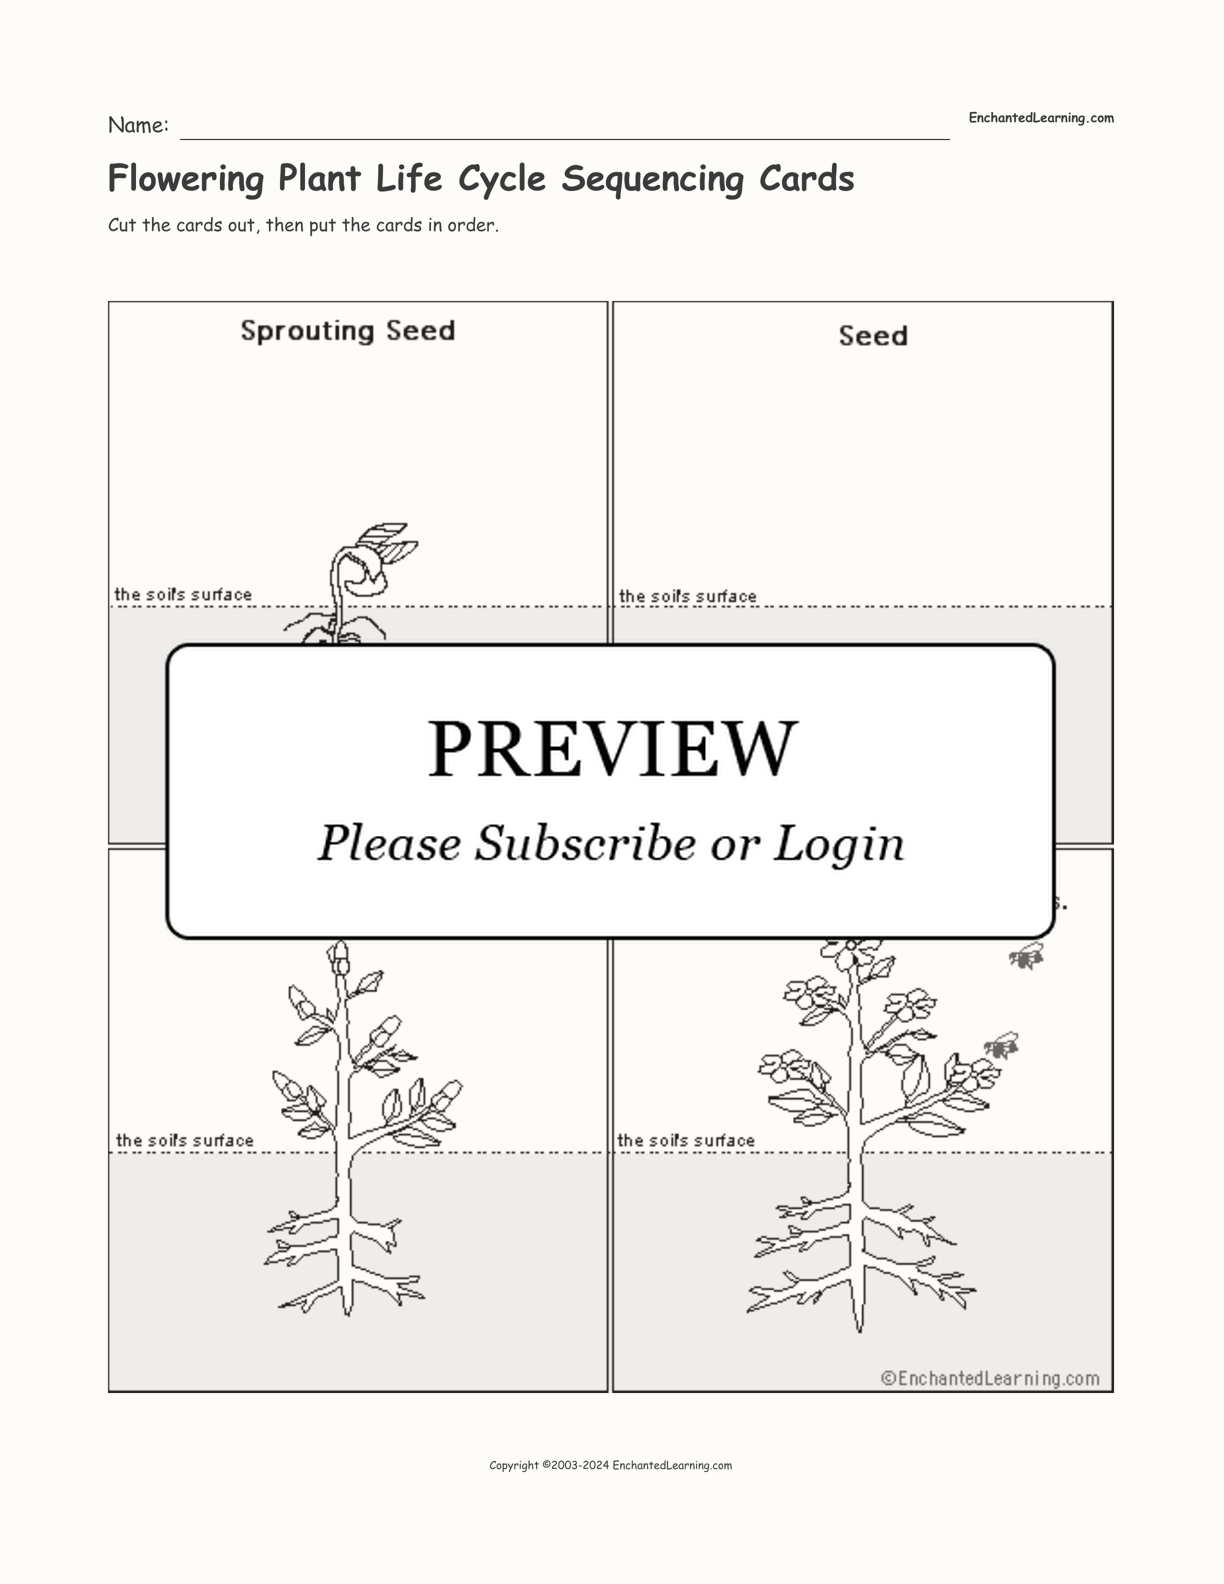 Flowering Plant Life Cycle Sequencing Cards interactive worksheet page 1